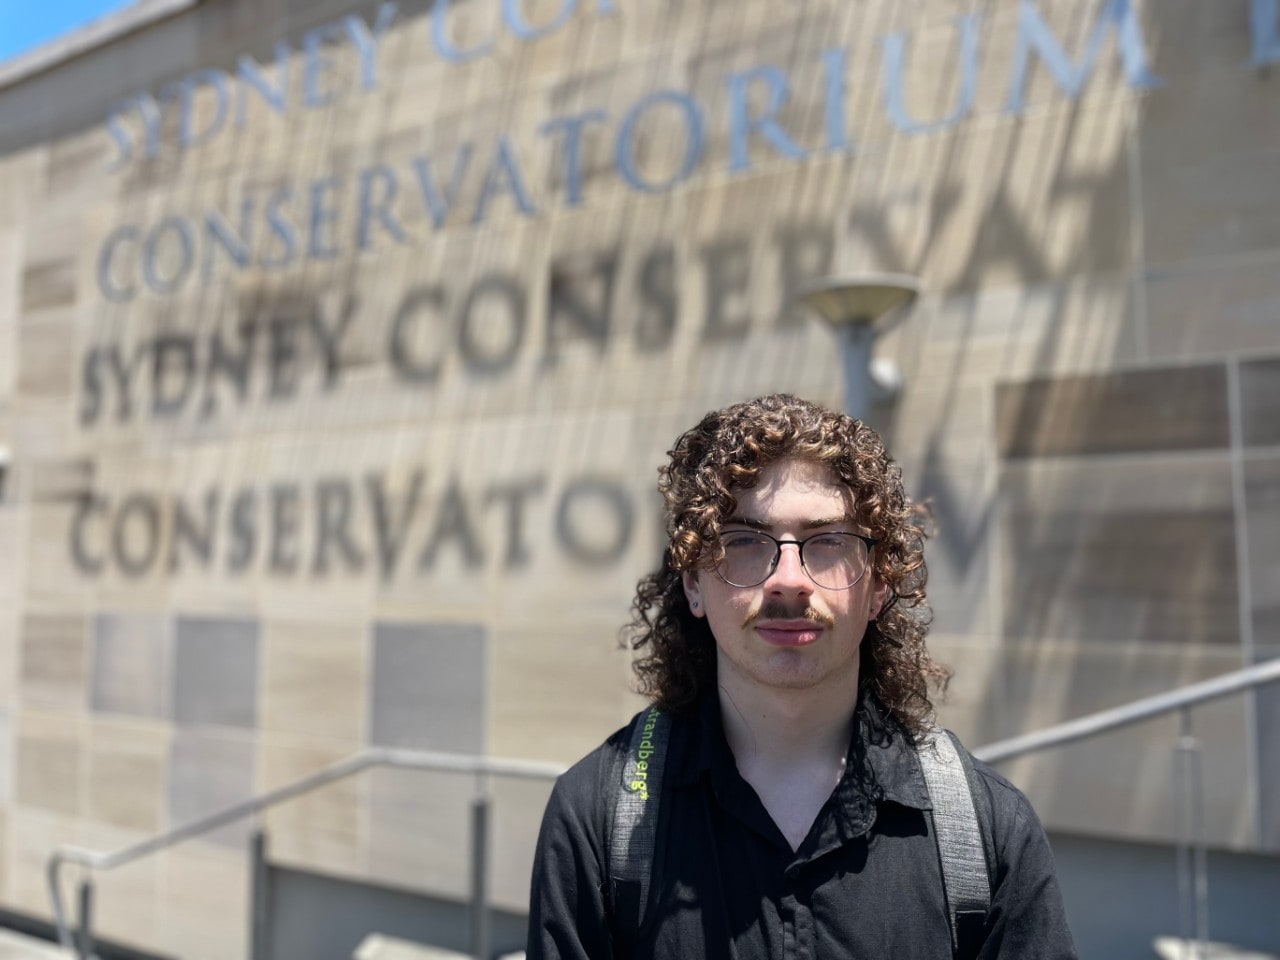 young man standing in front of the sign that says Sydney Conservatorium of Music